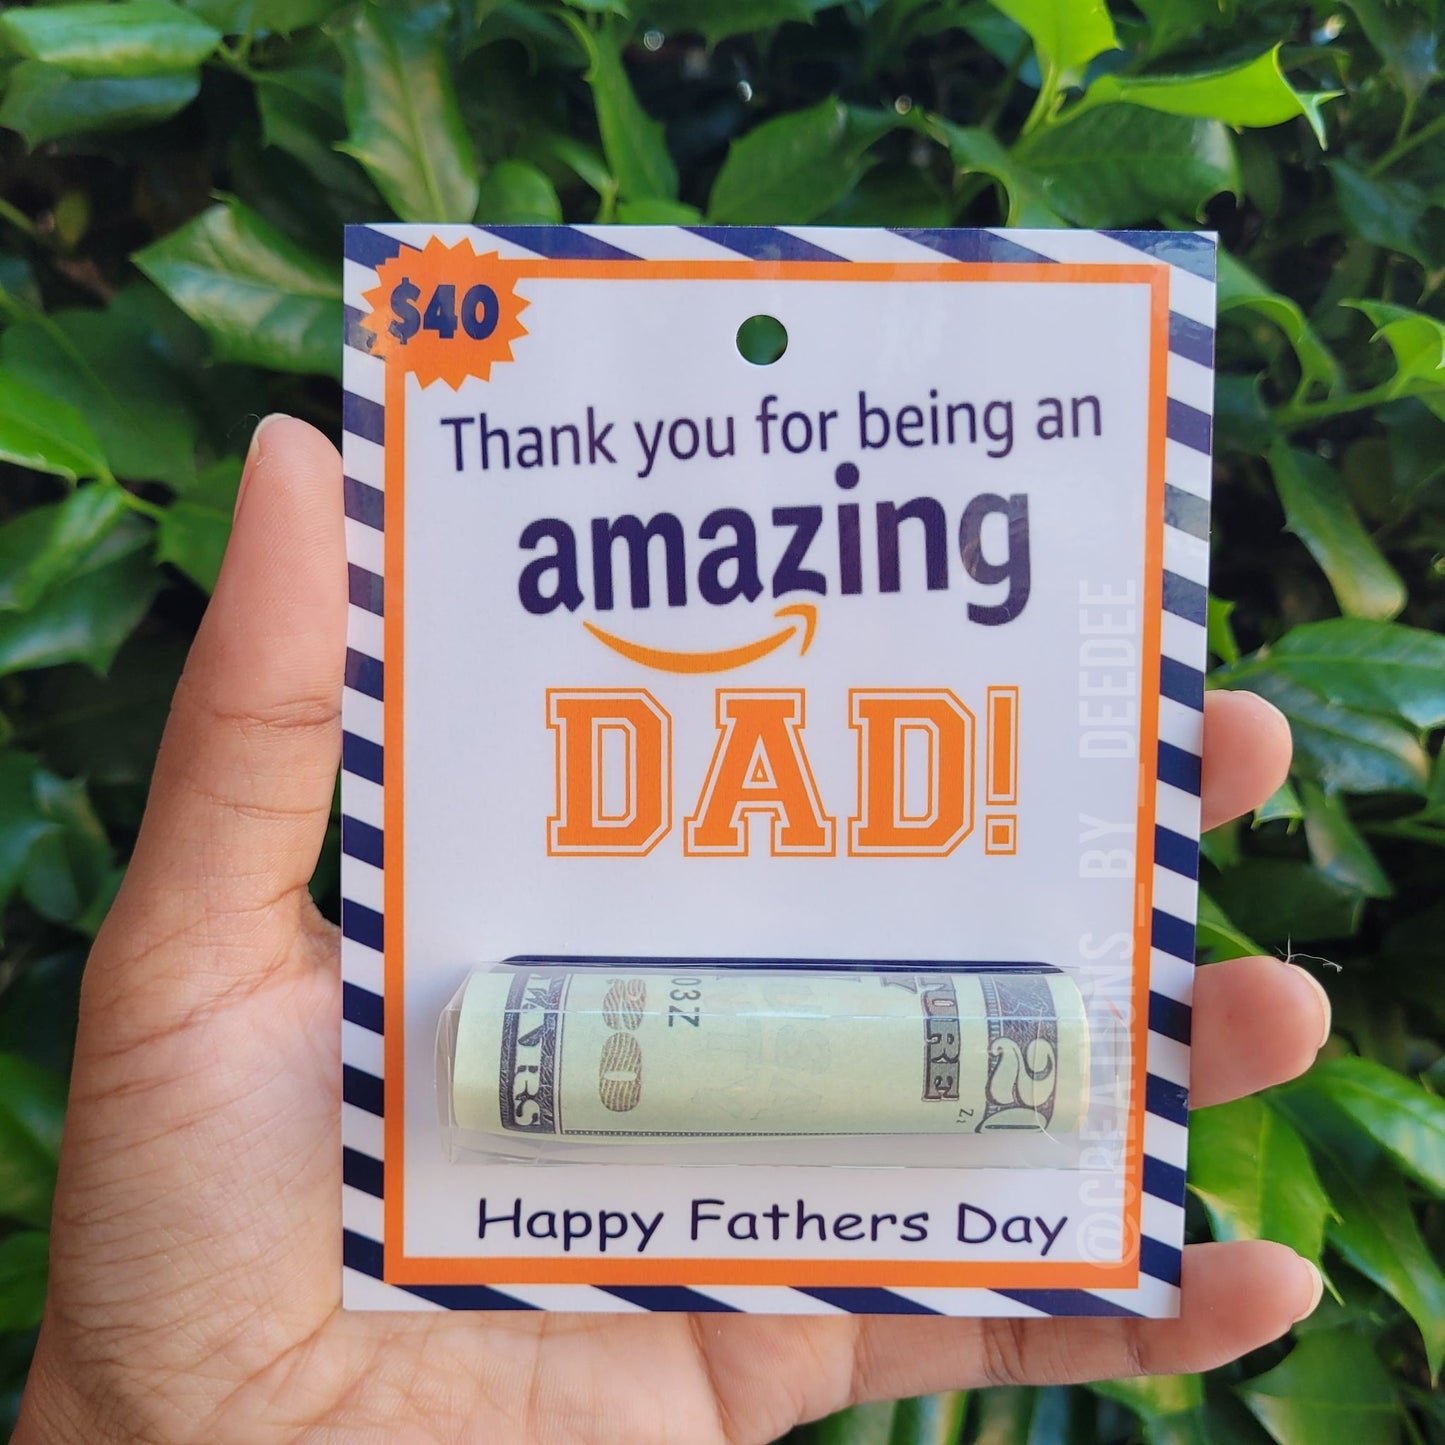 Thank for being an amazing Dad - Money holder card